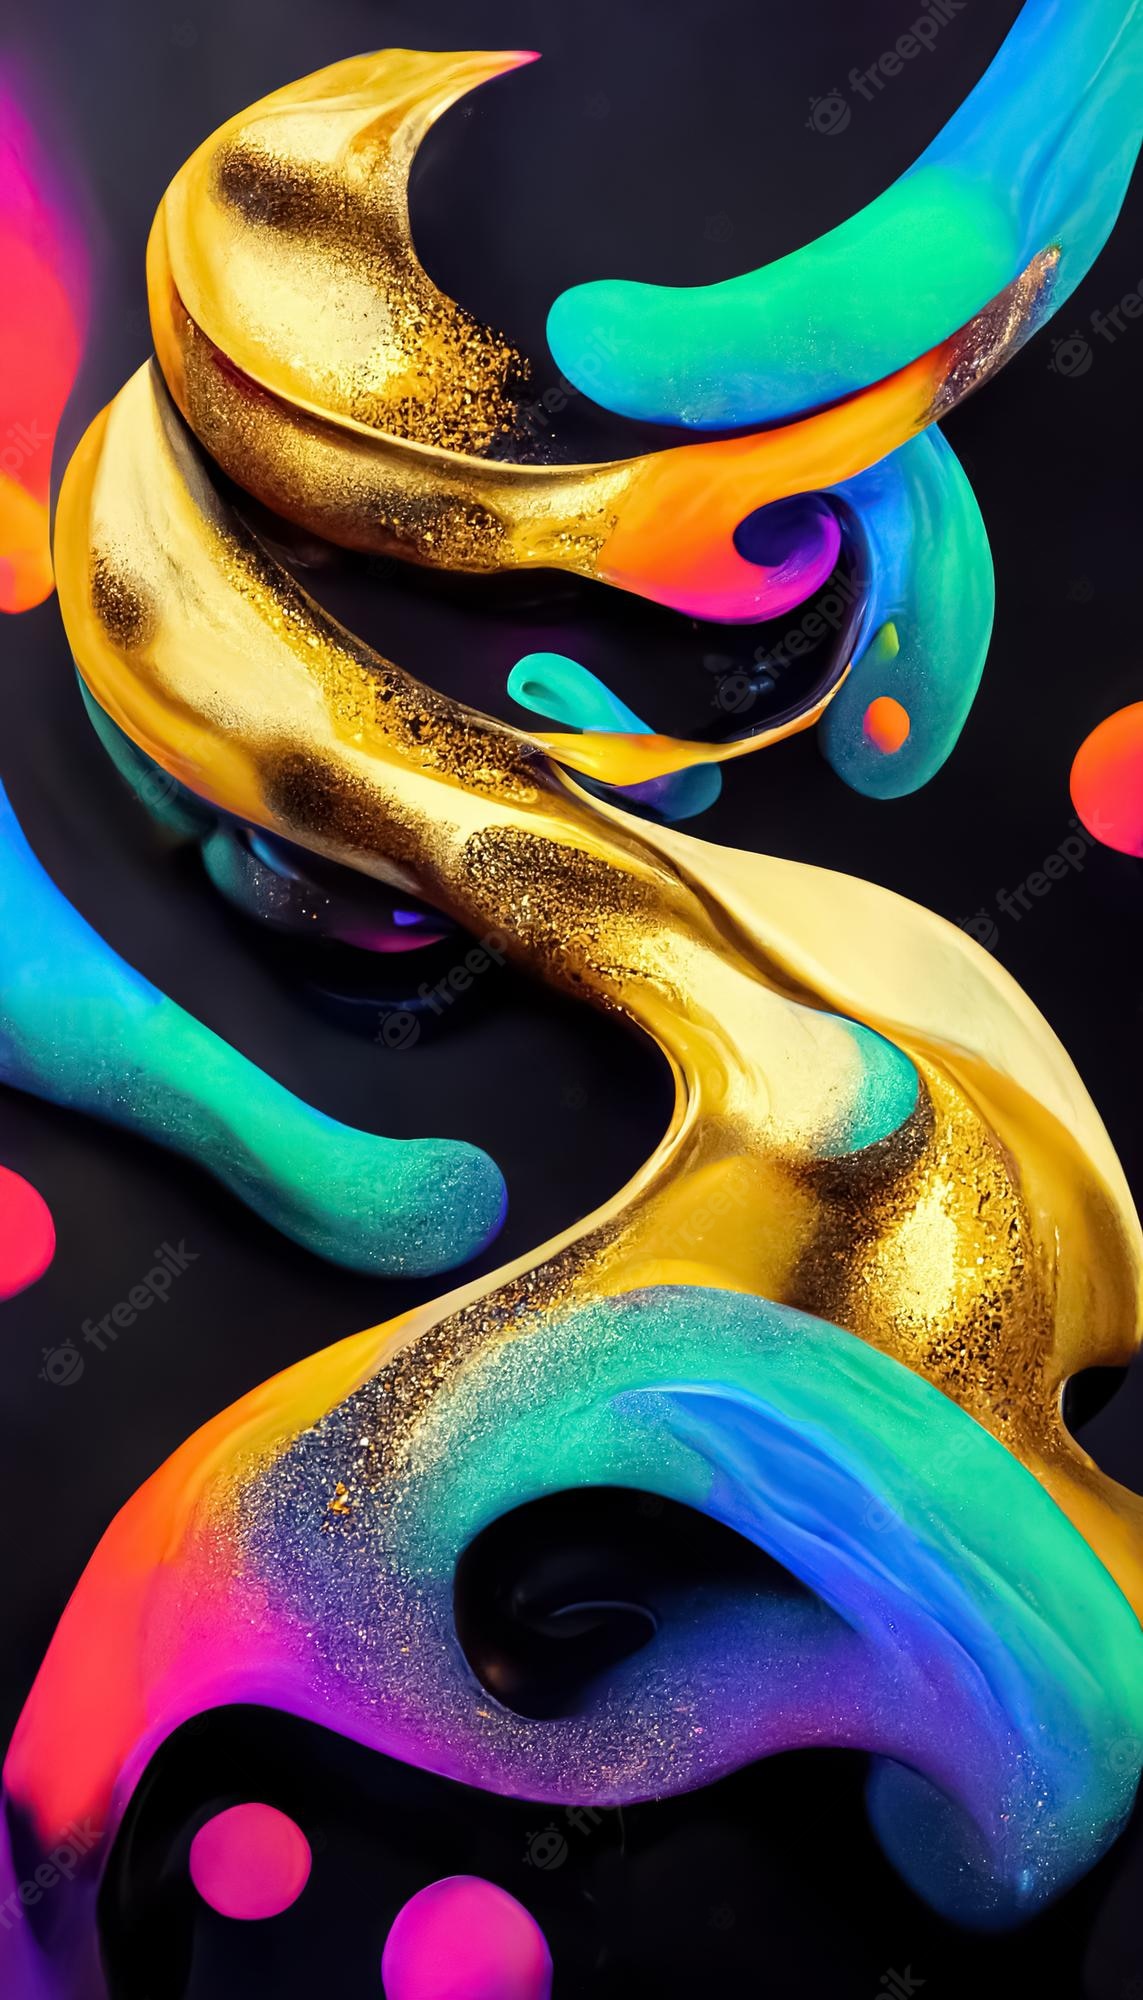 Premium Photo. Creative colorful neon gold abstract dynamic twisted fluid liquid shape background 3D illustration